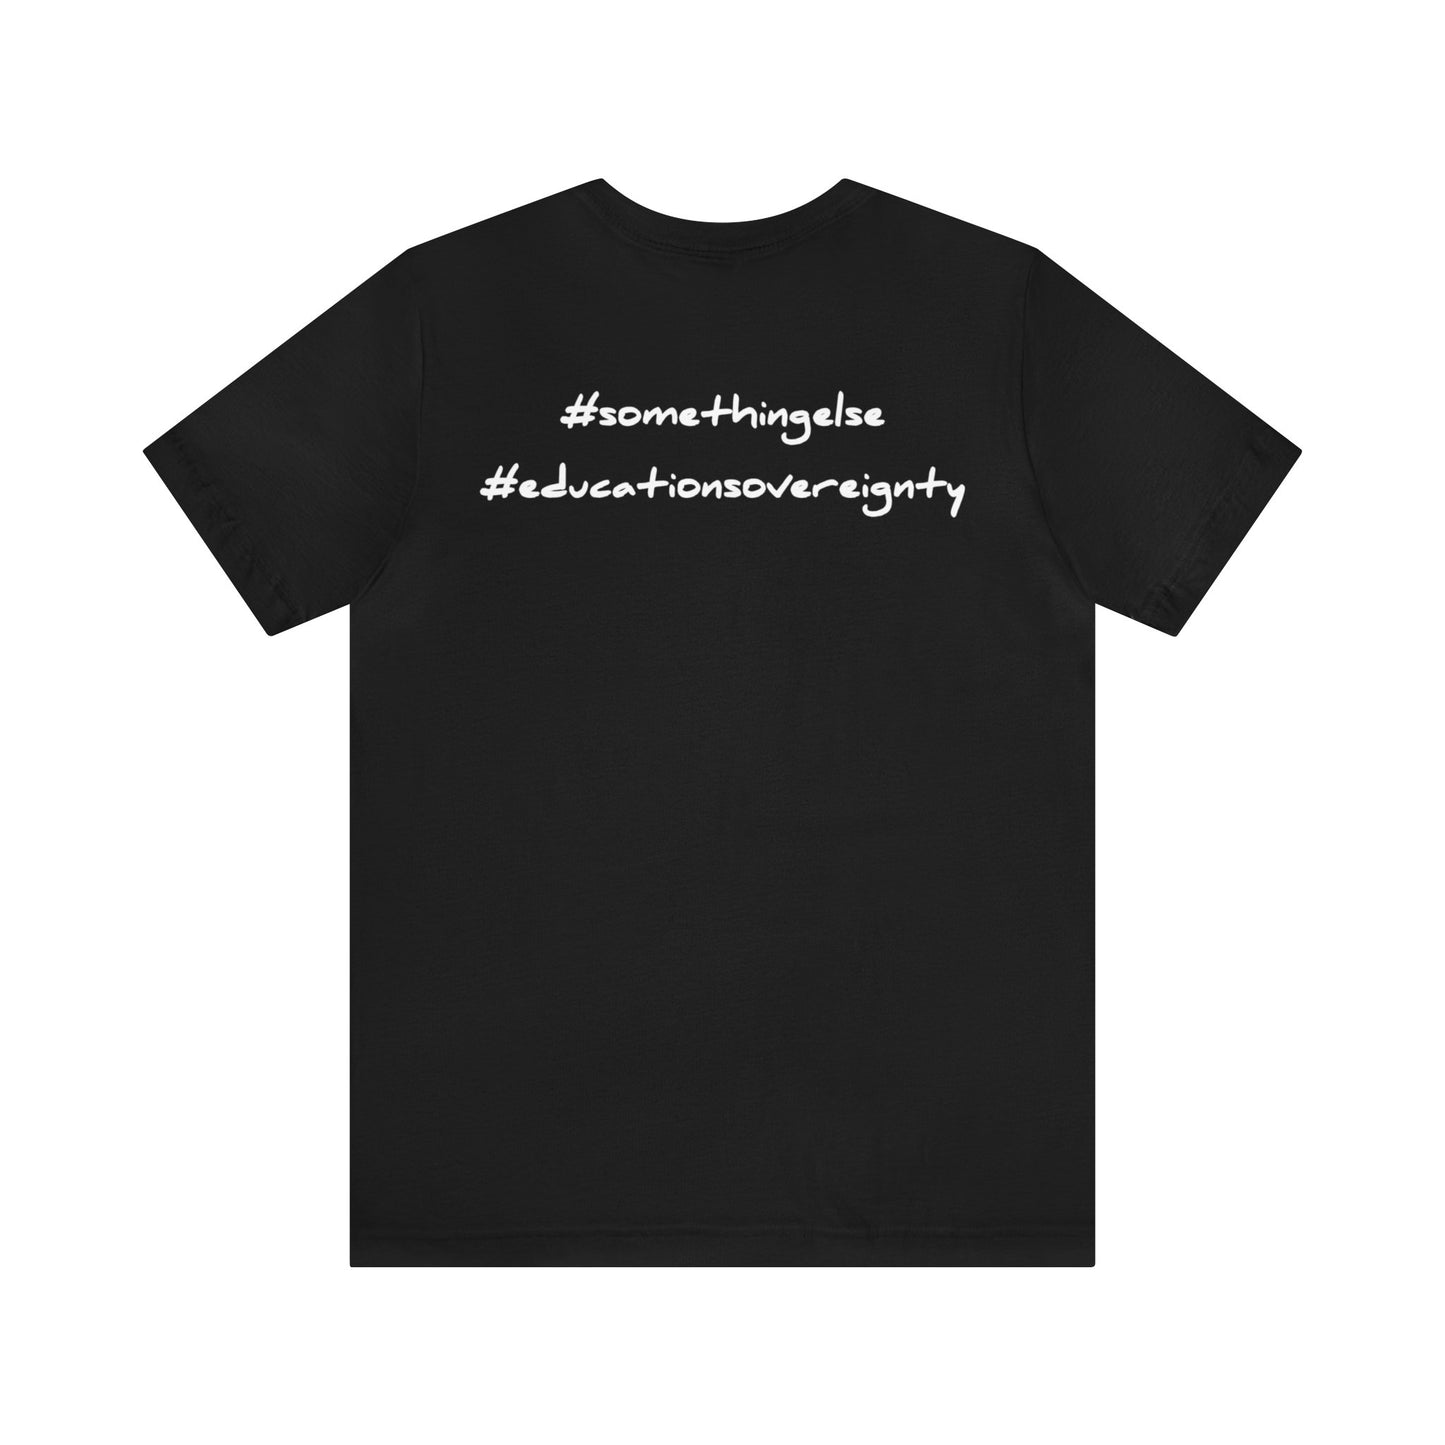 NIEA - I'm Statistically Significant: Education Sovereignty T-Shirt